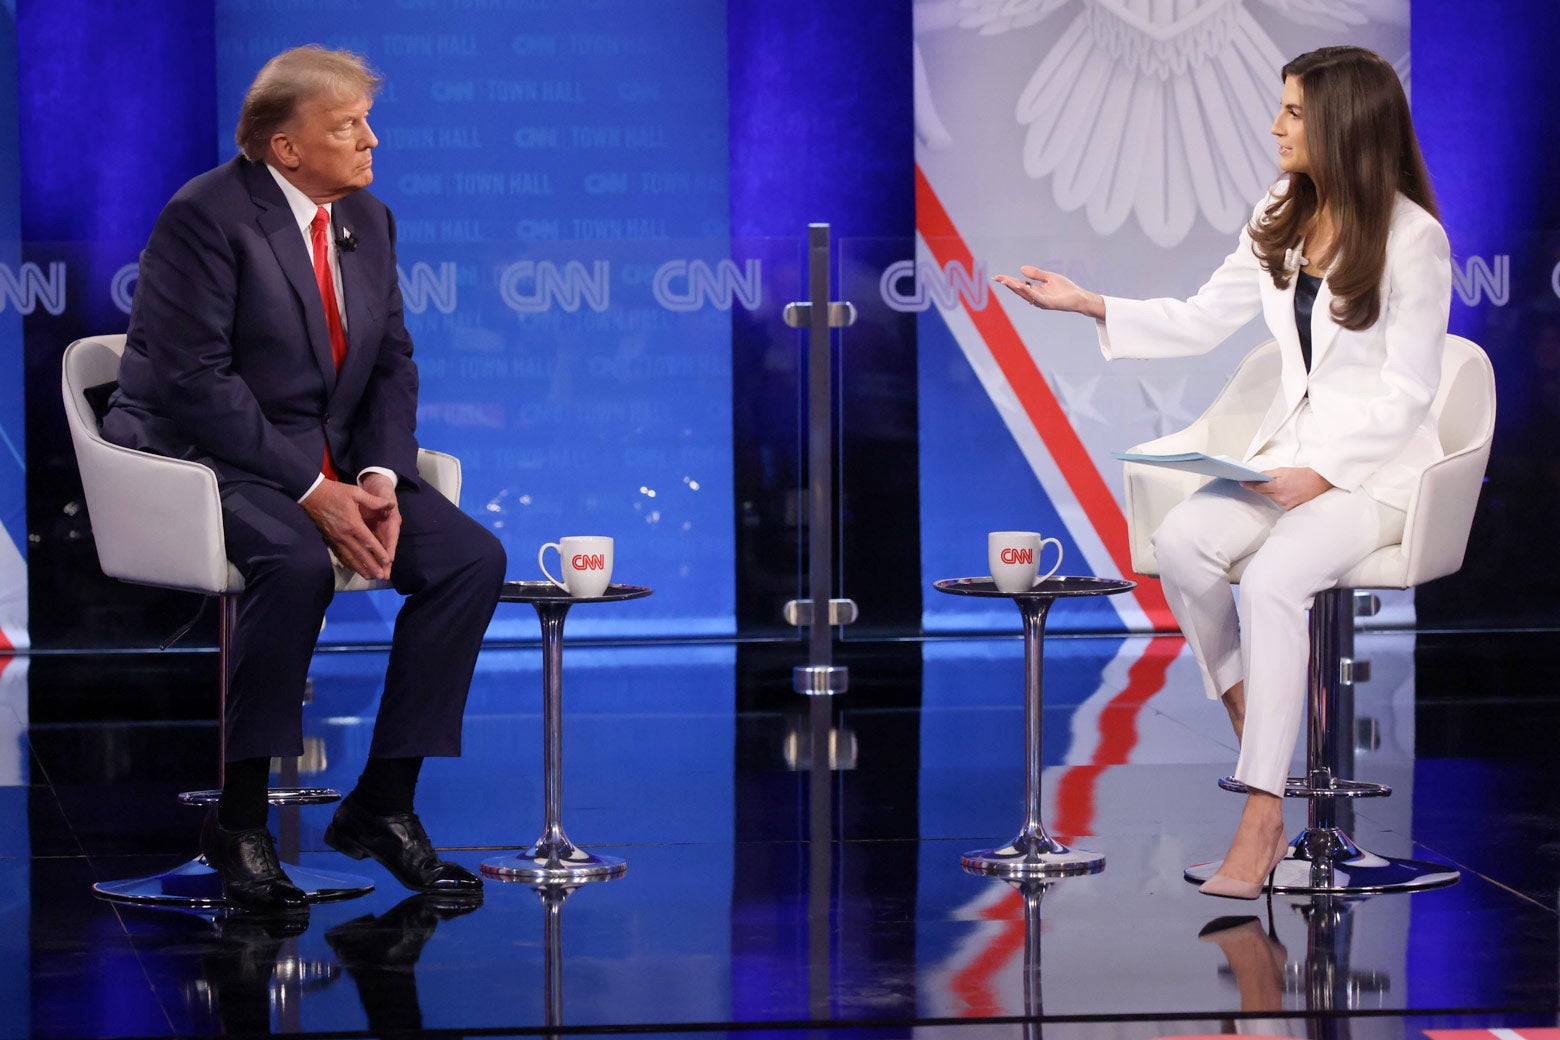 Donald Trump (L) and Kaitlan Collins (R) sit side-by-side onstage at the CNN town hall.